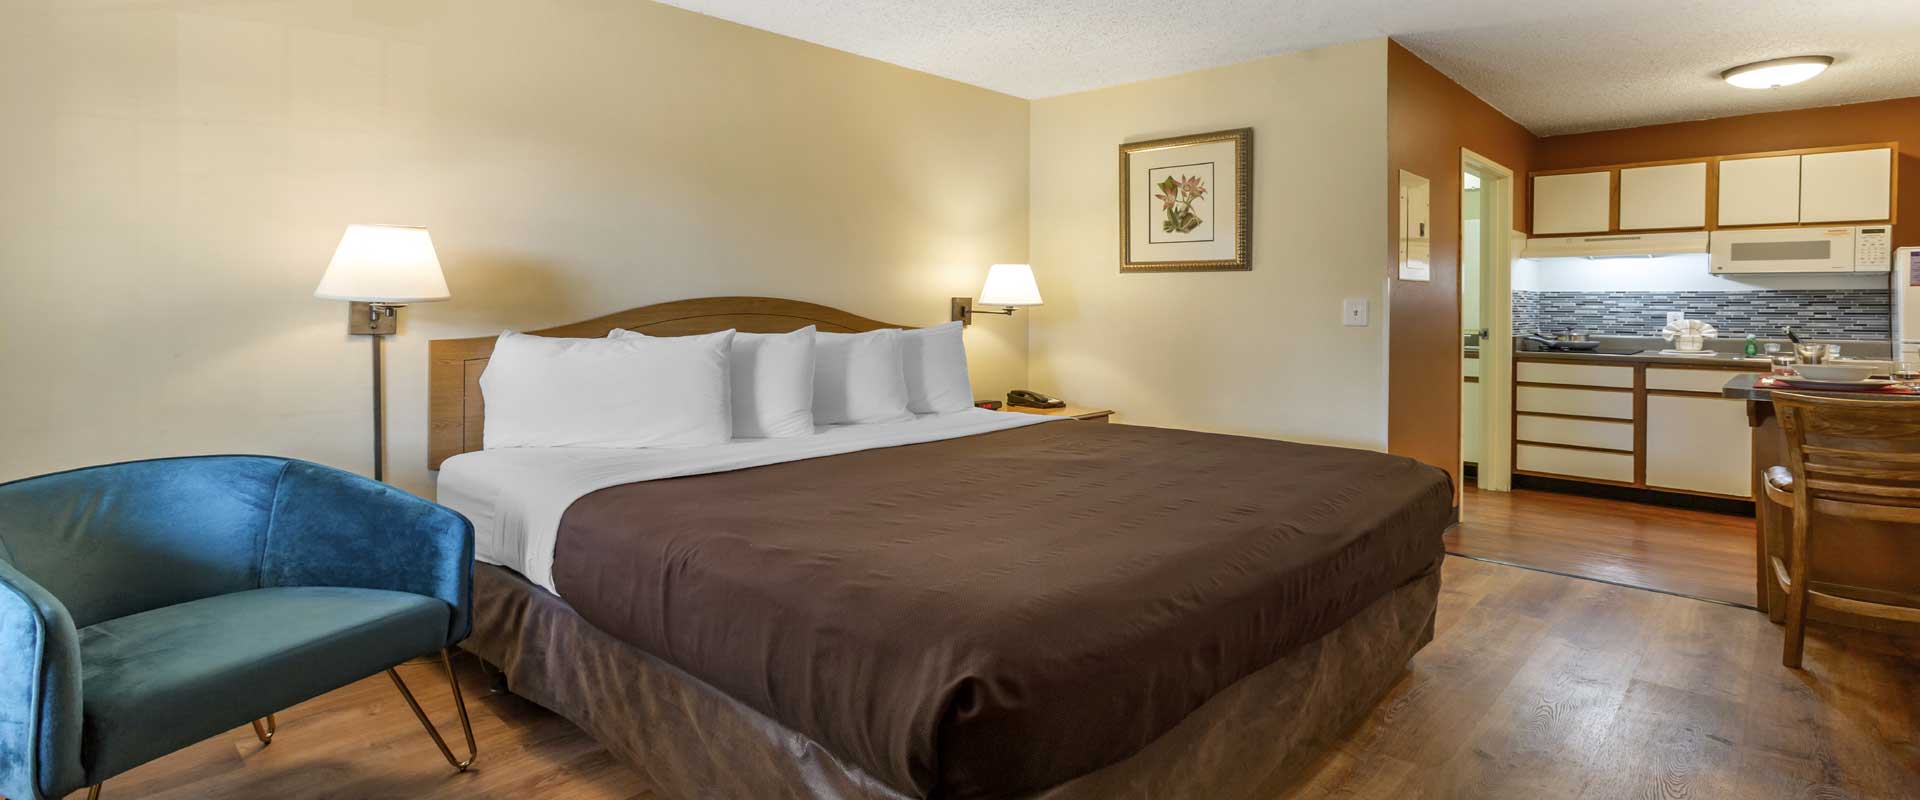 Suburban Extended Stay | Albuquerque Cheap Budget Reasonable Rates